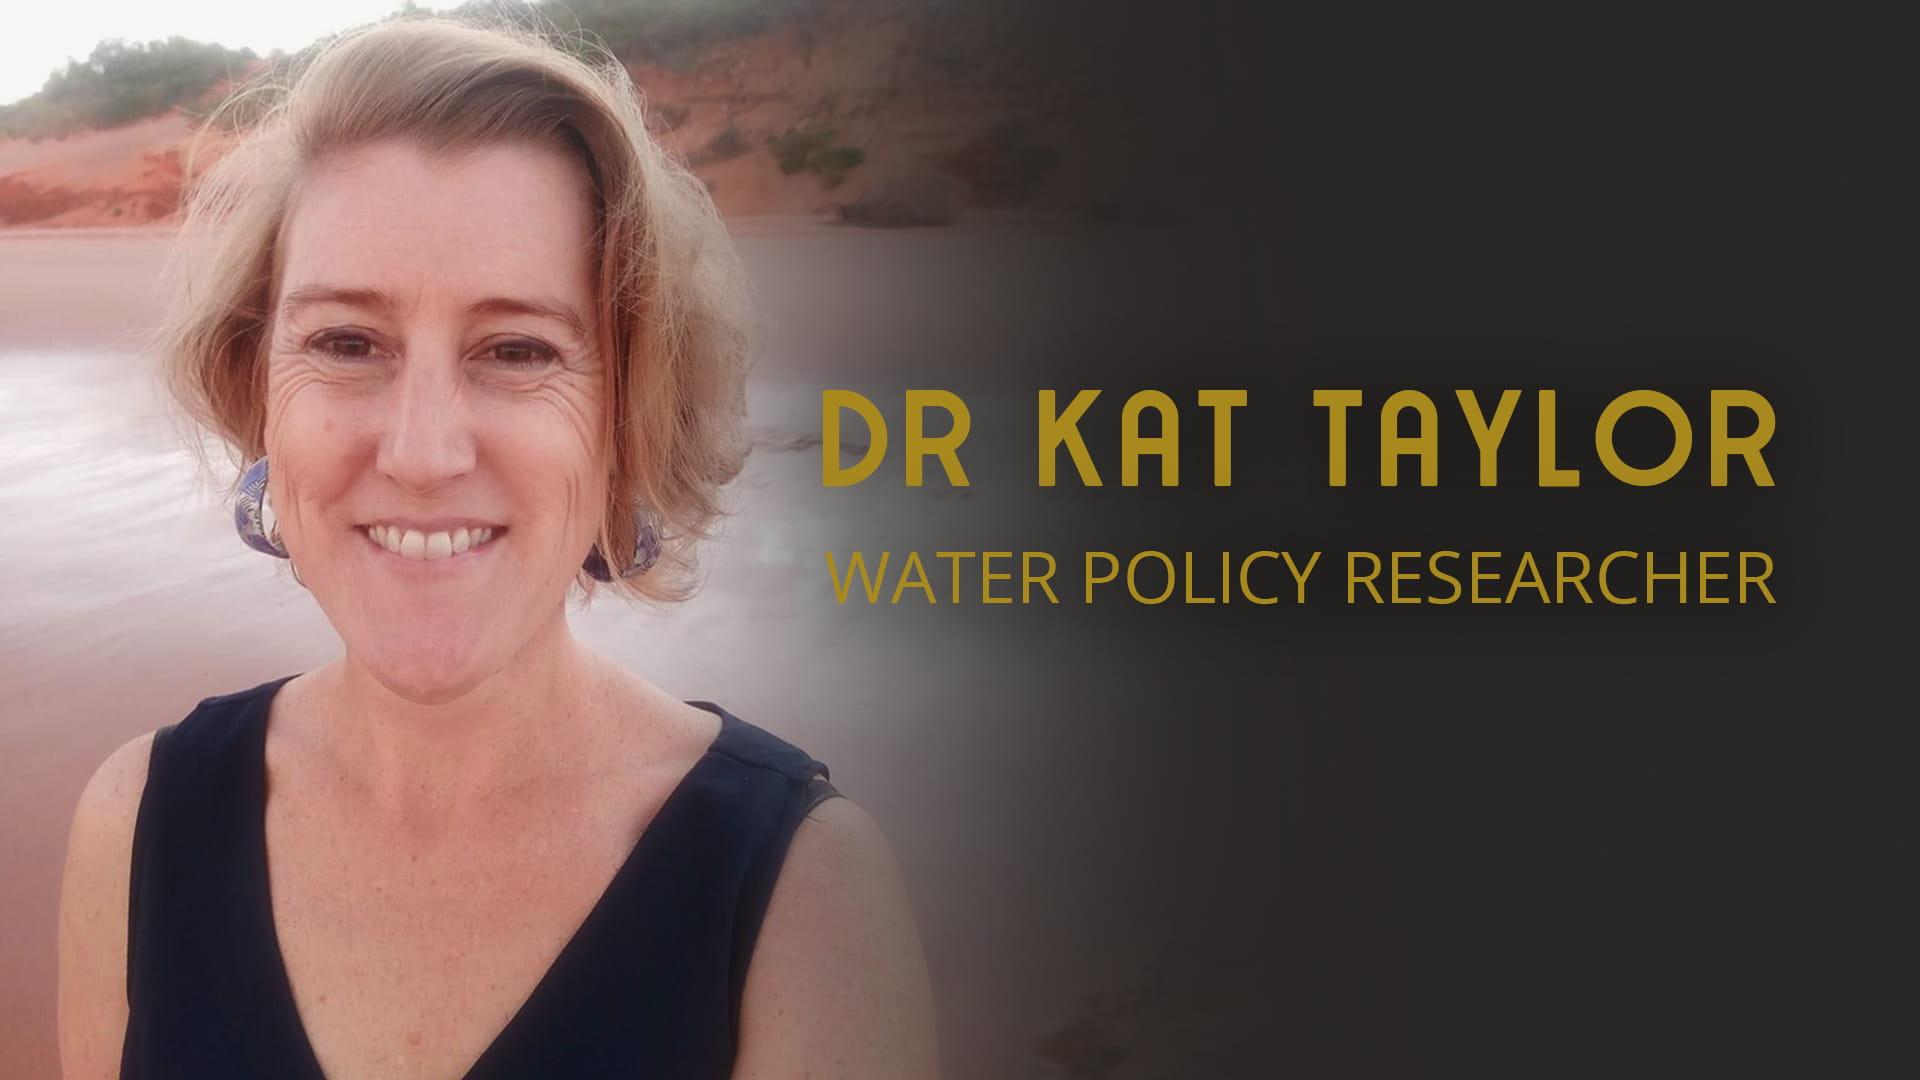 Water policy and research